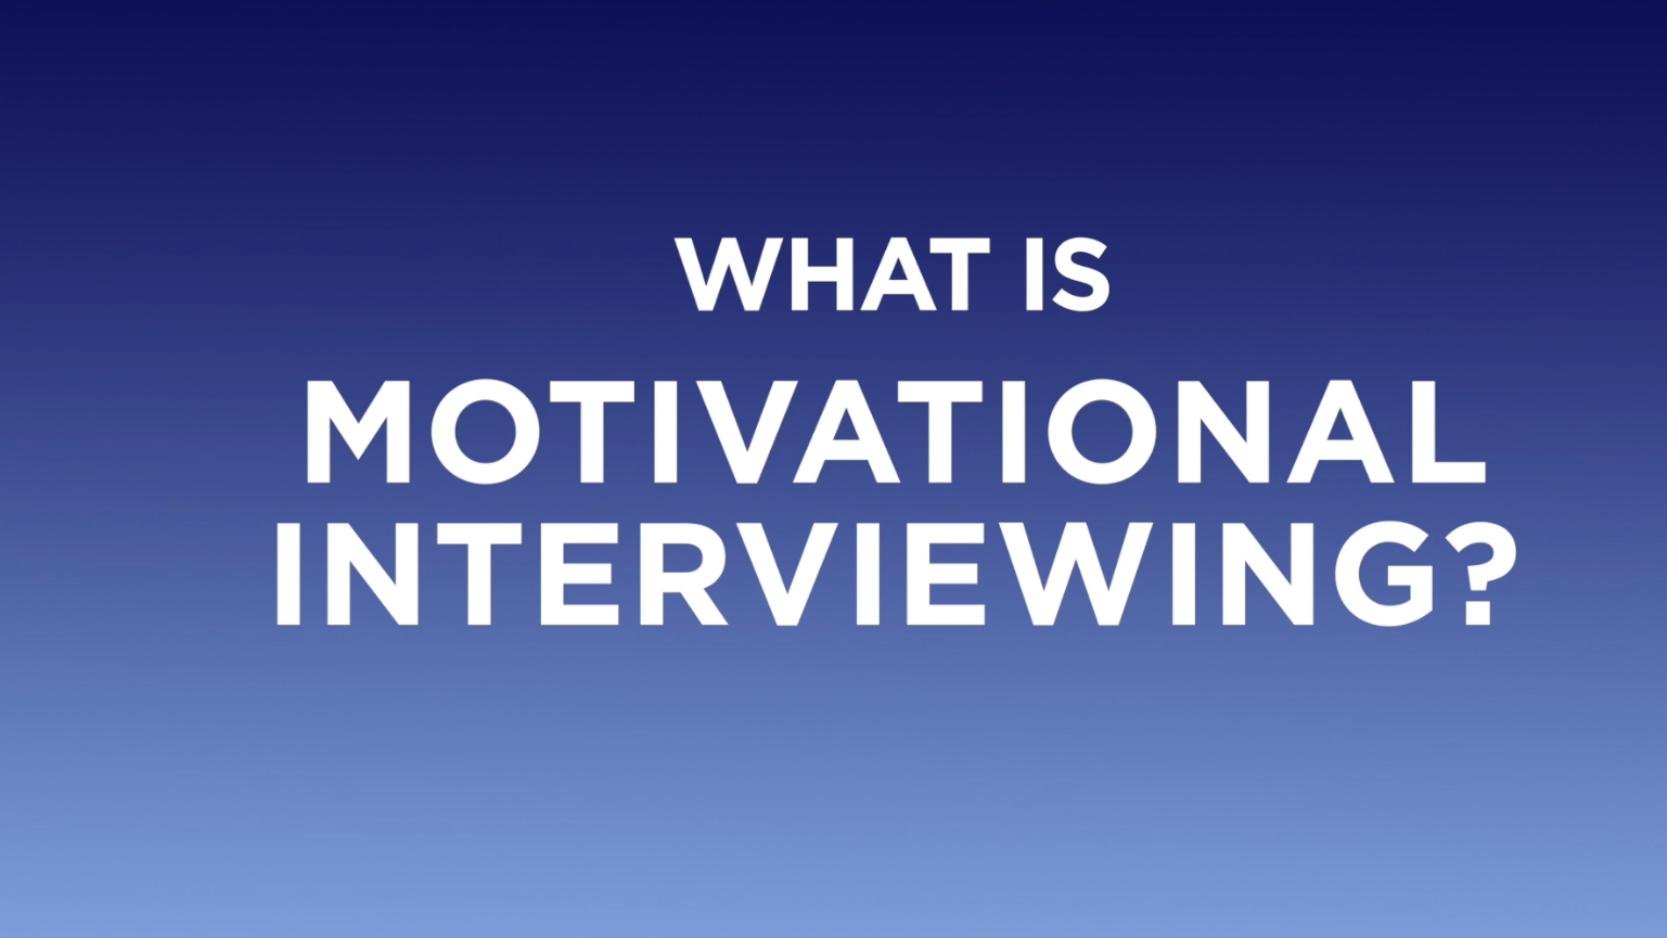 What Is Motivational Interviewing Video Splash Image